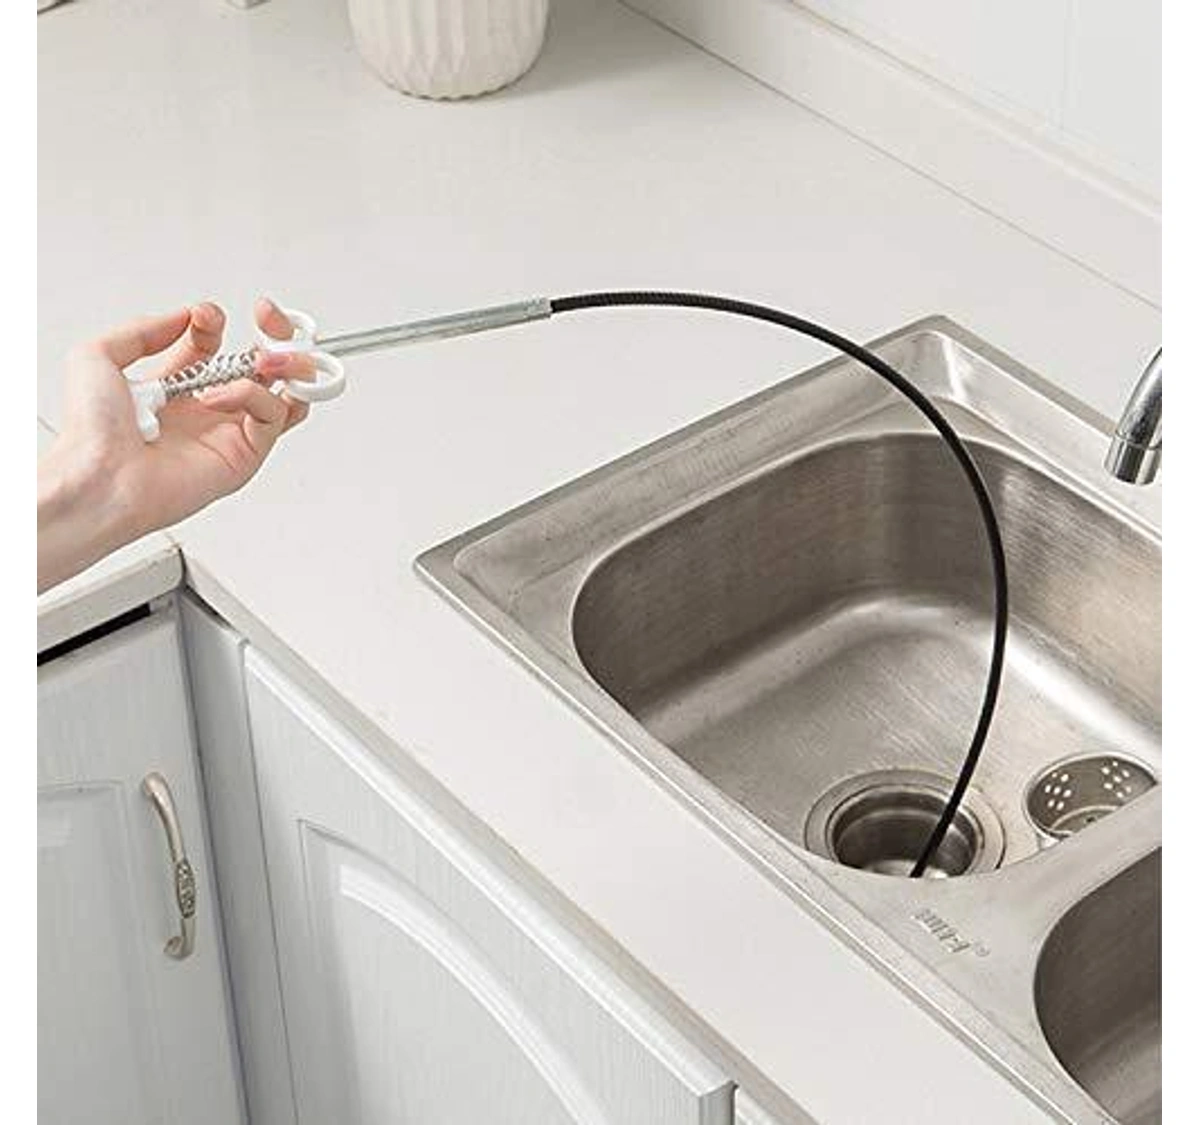 METAL WIRE BRUSH HAND KITCHEN SINK CLEANING HOOK SEWER DREDGING